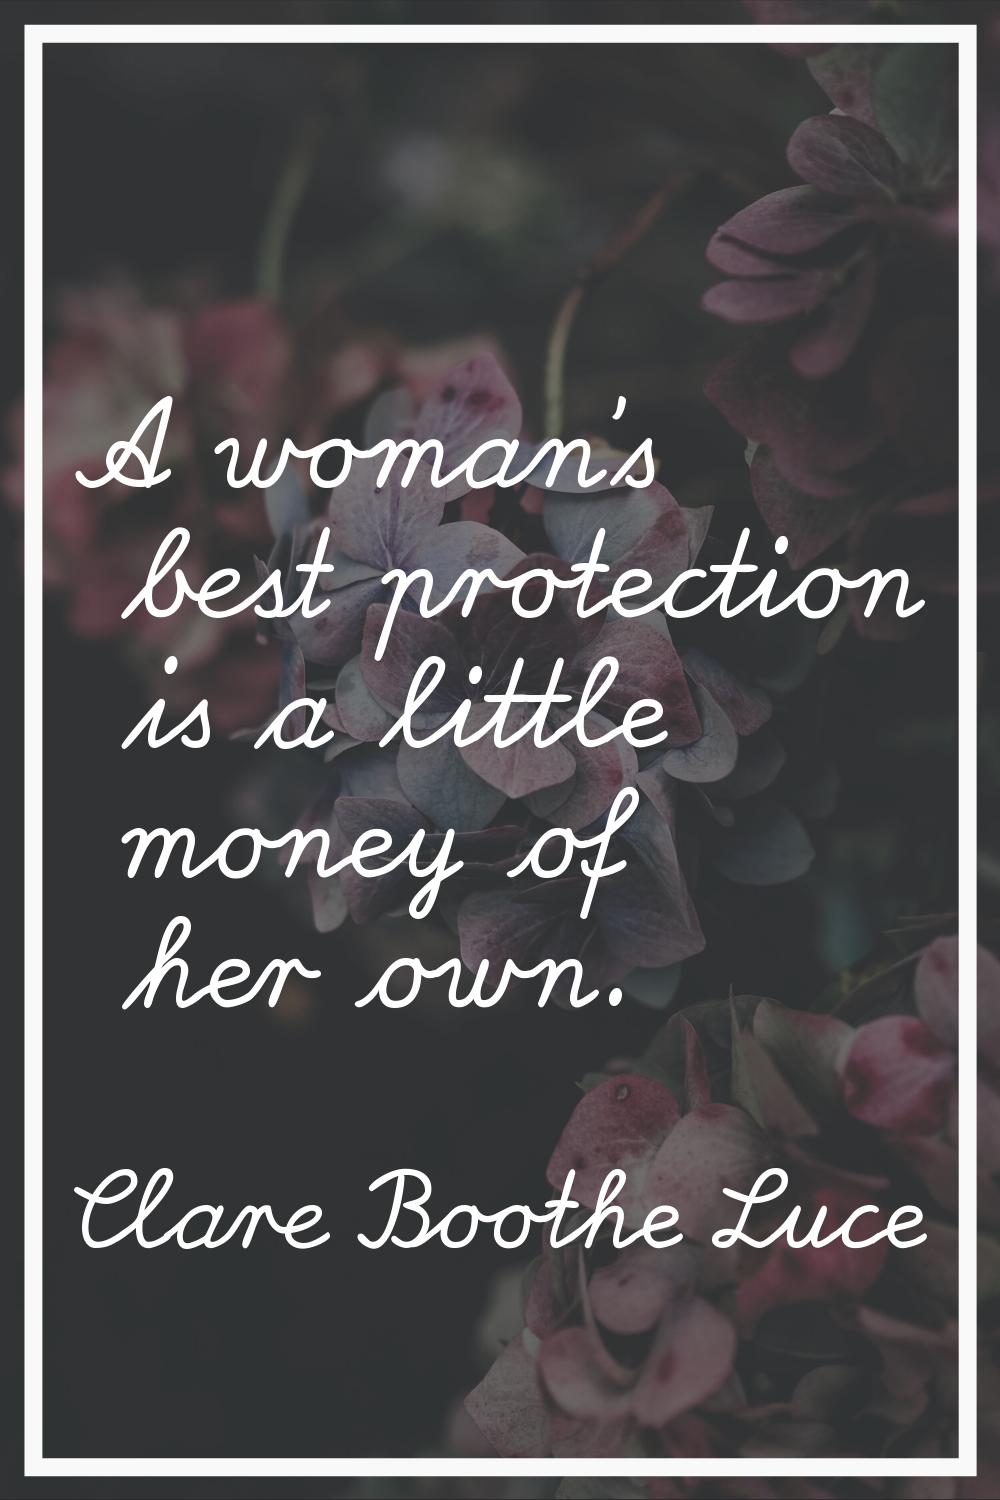 A woman's best protection is a little money of her own.